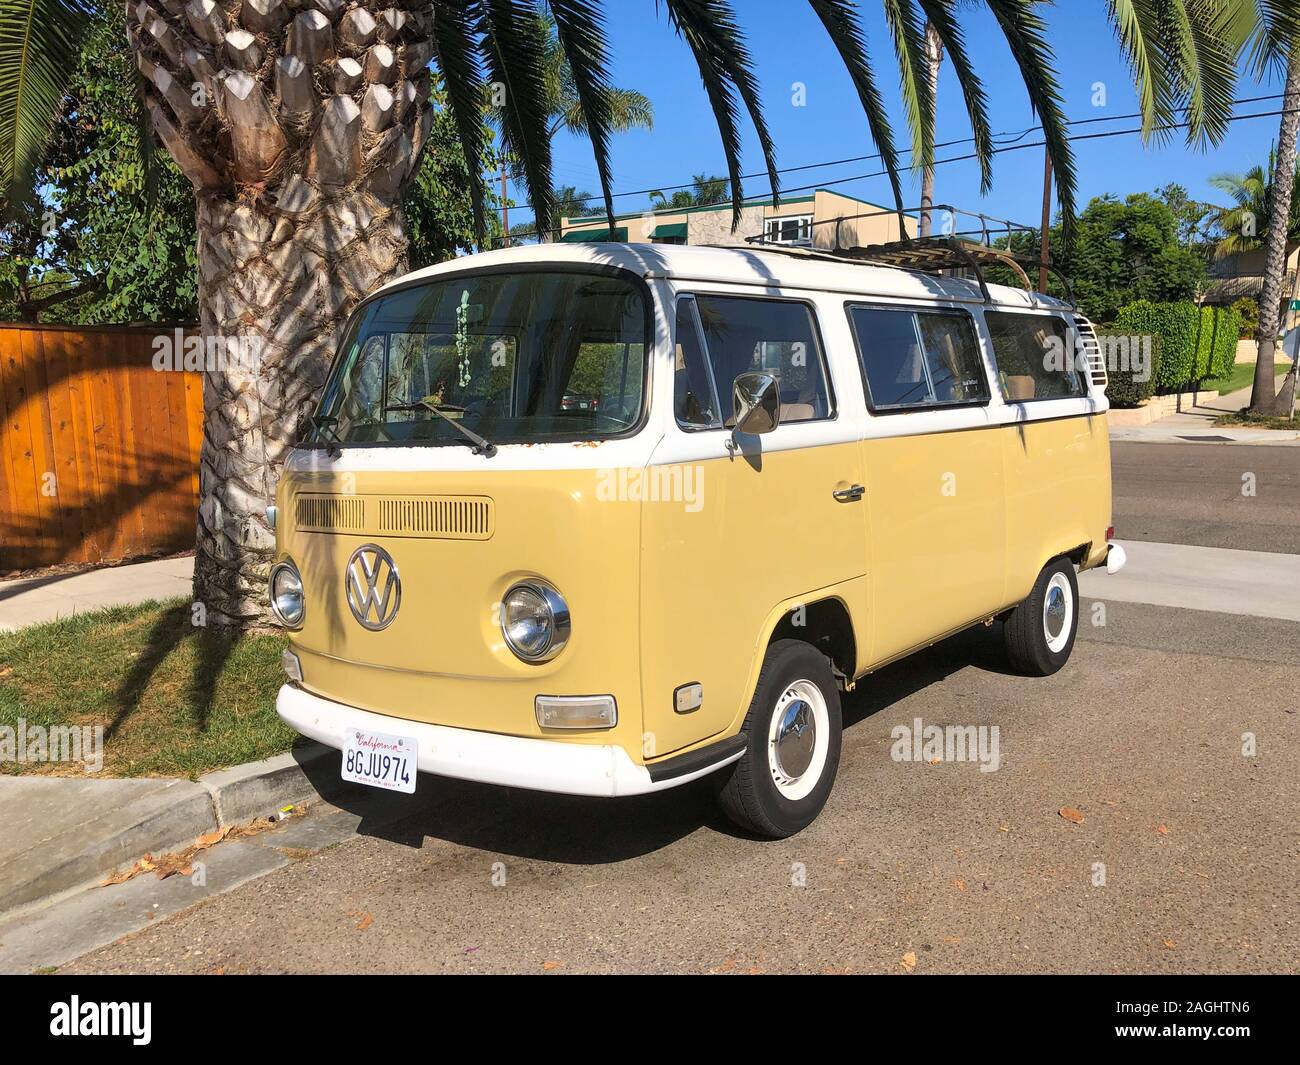 Classic beige and white vintage Volkswagen T1 camper van. San Diego, California, USA. July 13th, 2019 Stock Photo